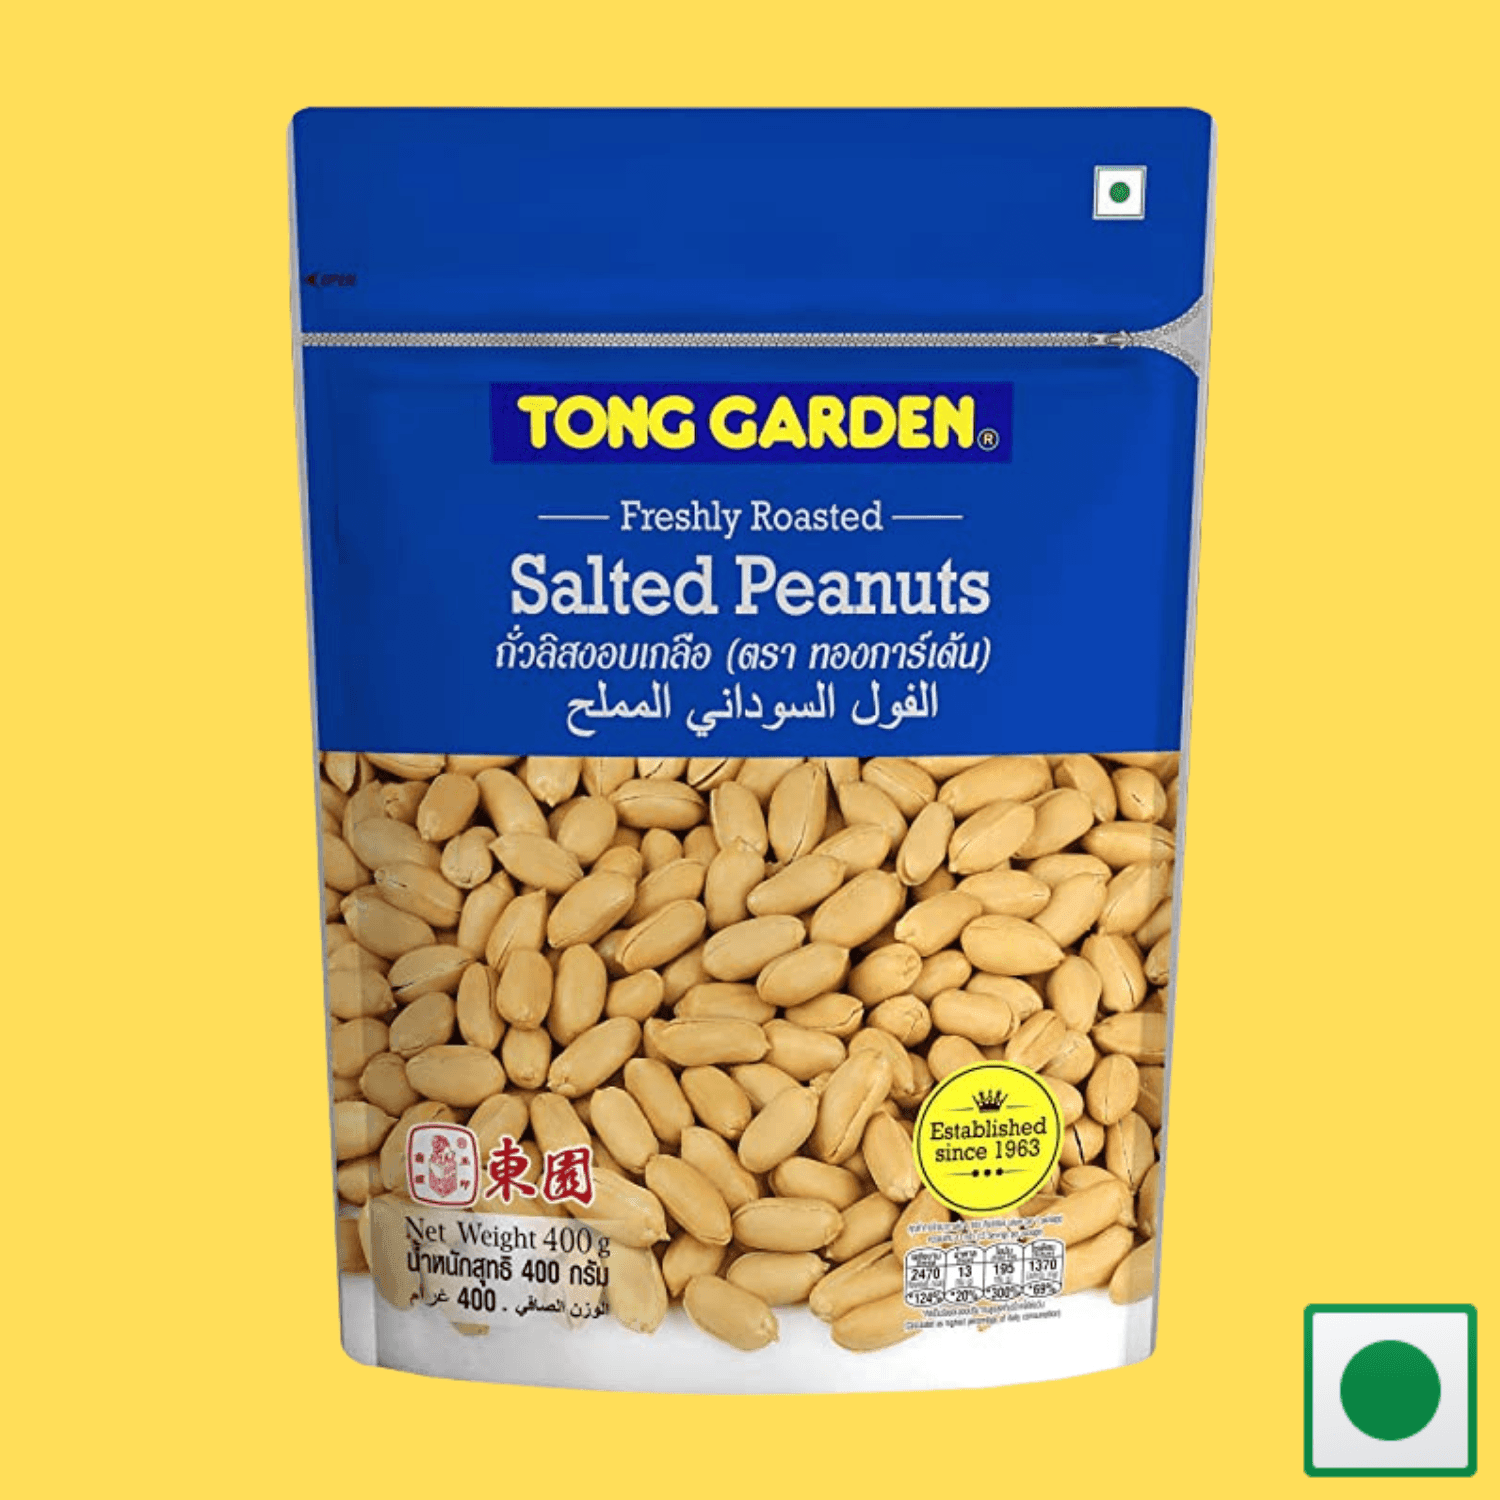 Tong Garden Salted Peanuts, 400g (IMPORTED) - Super 7 Mart